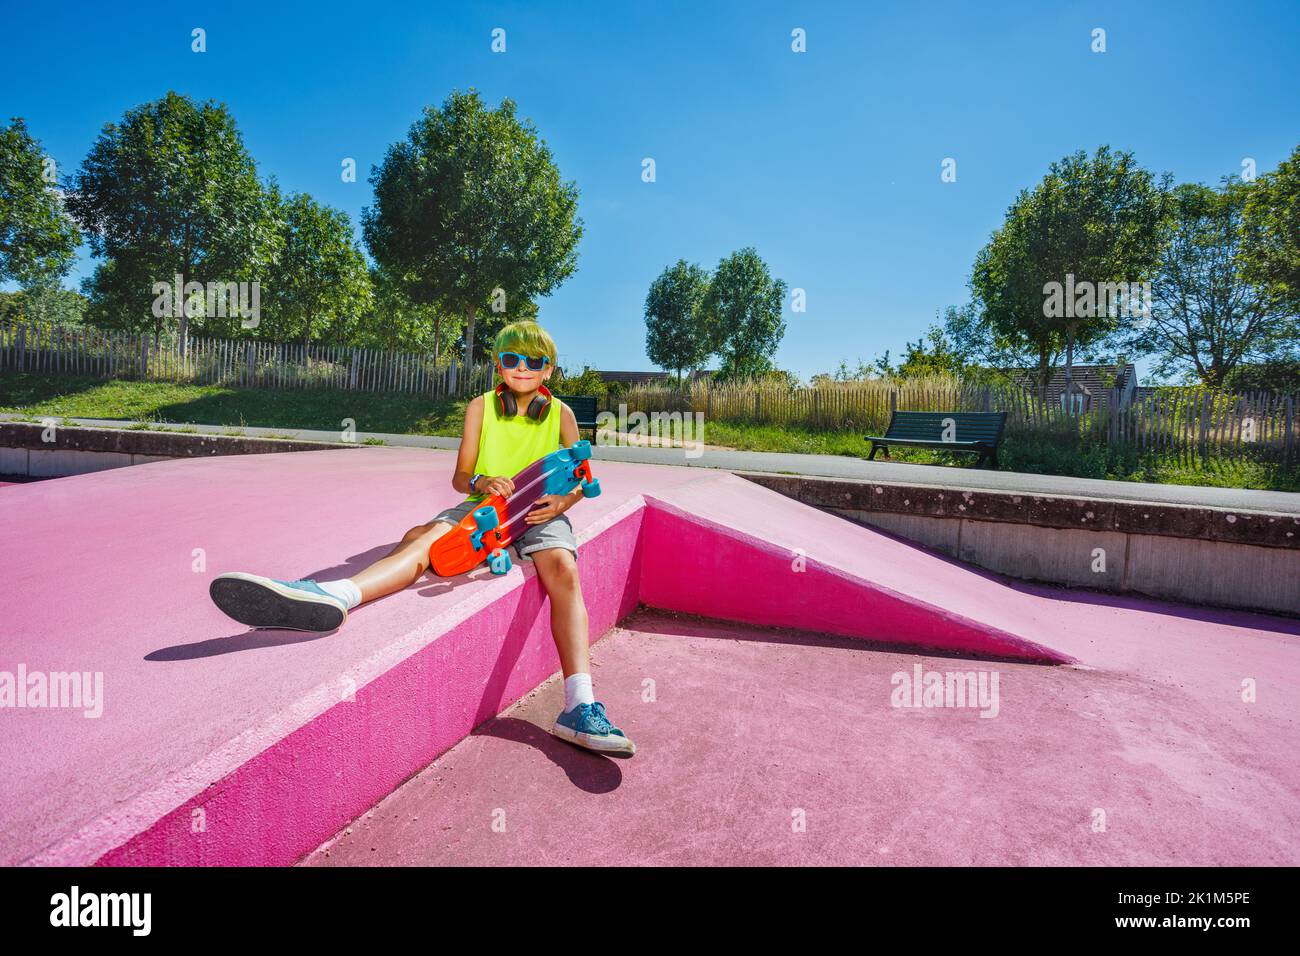 Portrait of a cute young preteen boy with green hair sit on ramp Stock Photo